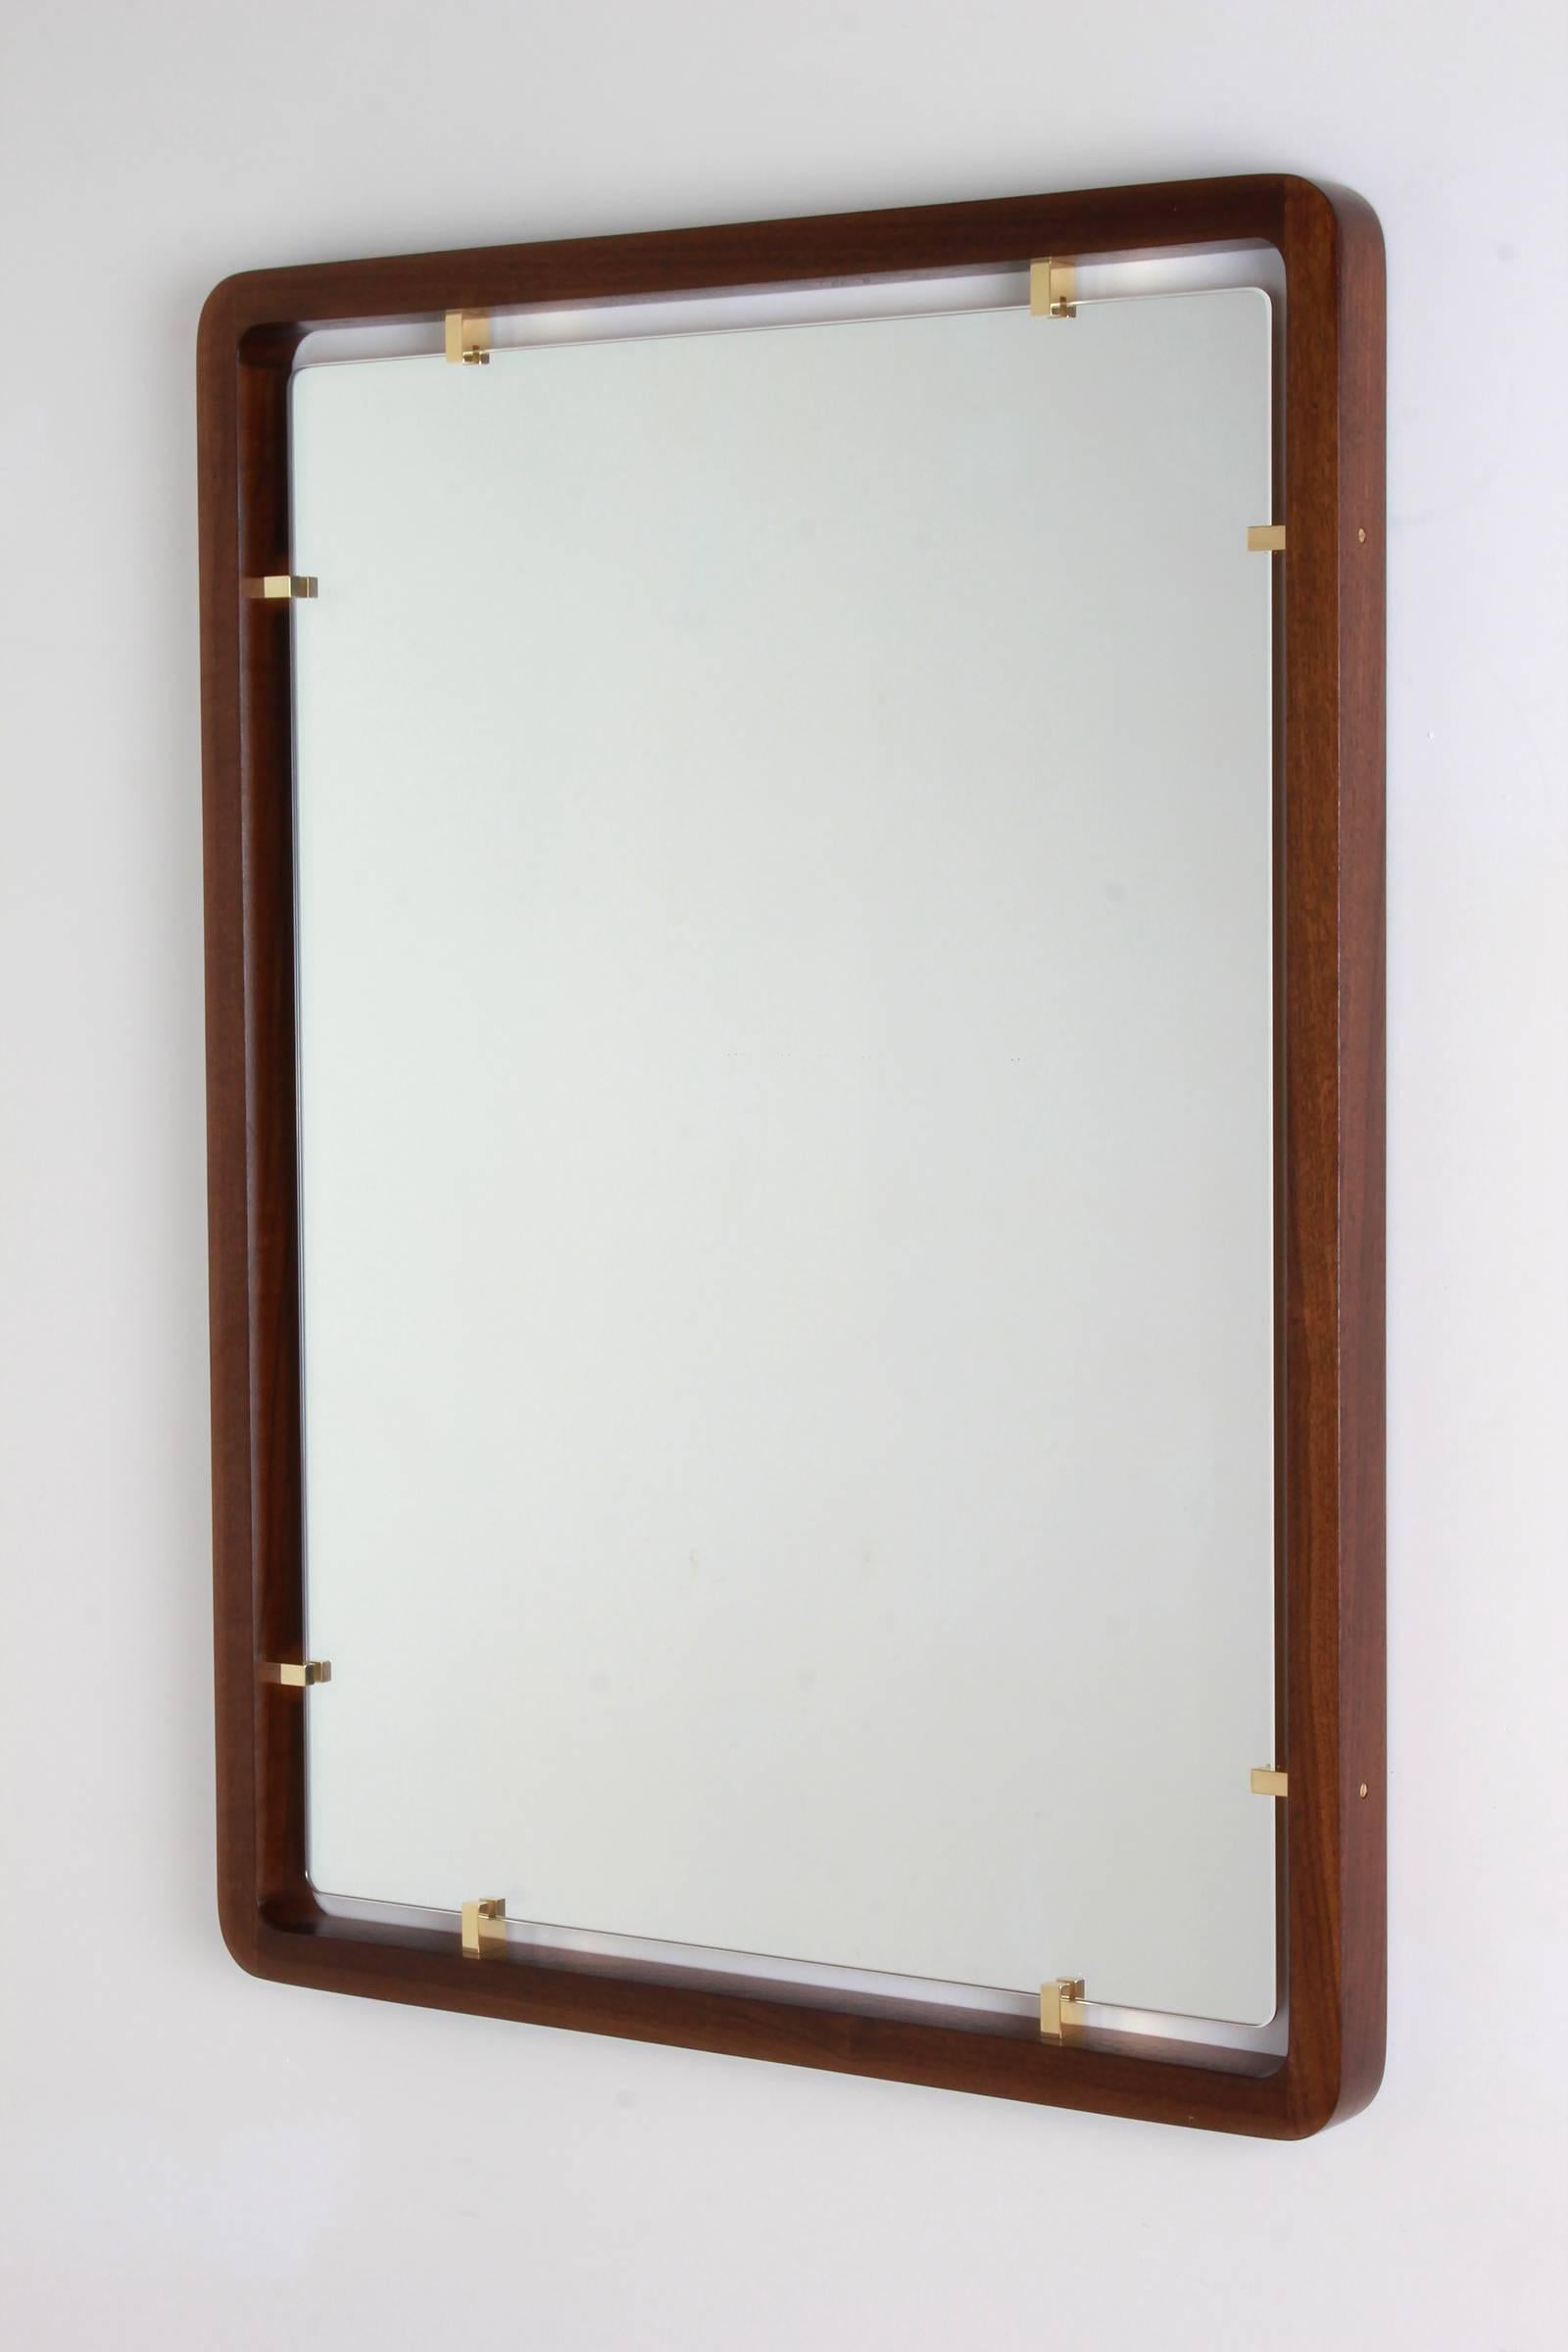 Beautiful floating mirror with walnut frame and solid brass fittings.
Custom sizes available.